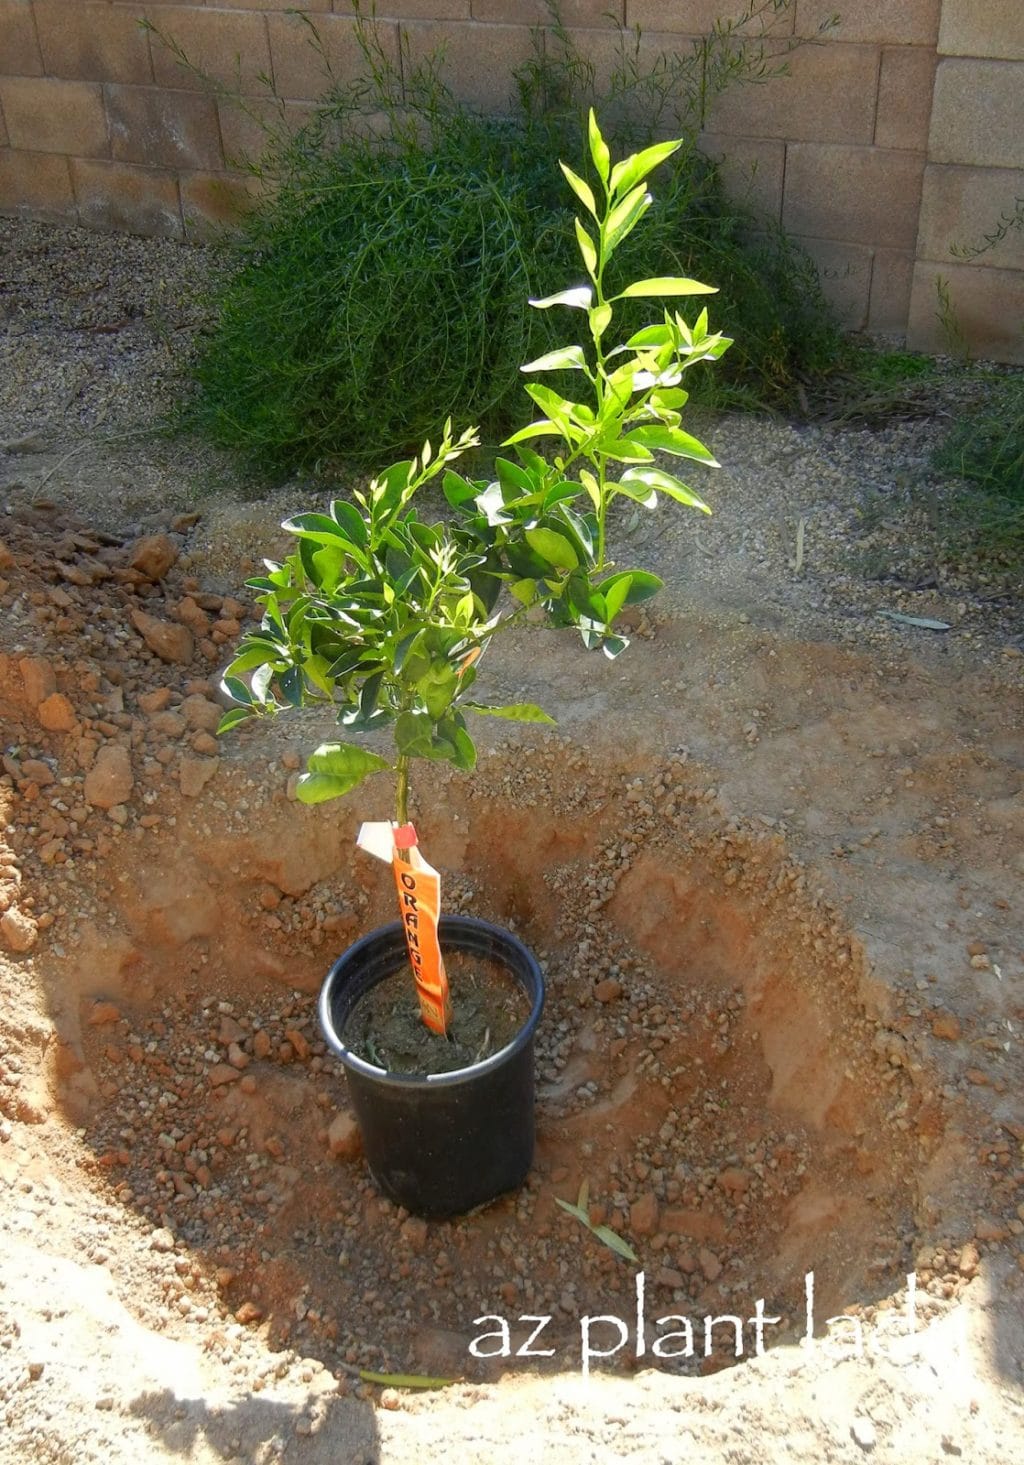 When planting trees, it is best to dig them 3x as wide as the rootball to allow roots an easier time to grow outward.  However, plant at the same depth as the root ball.